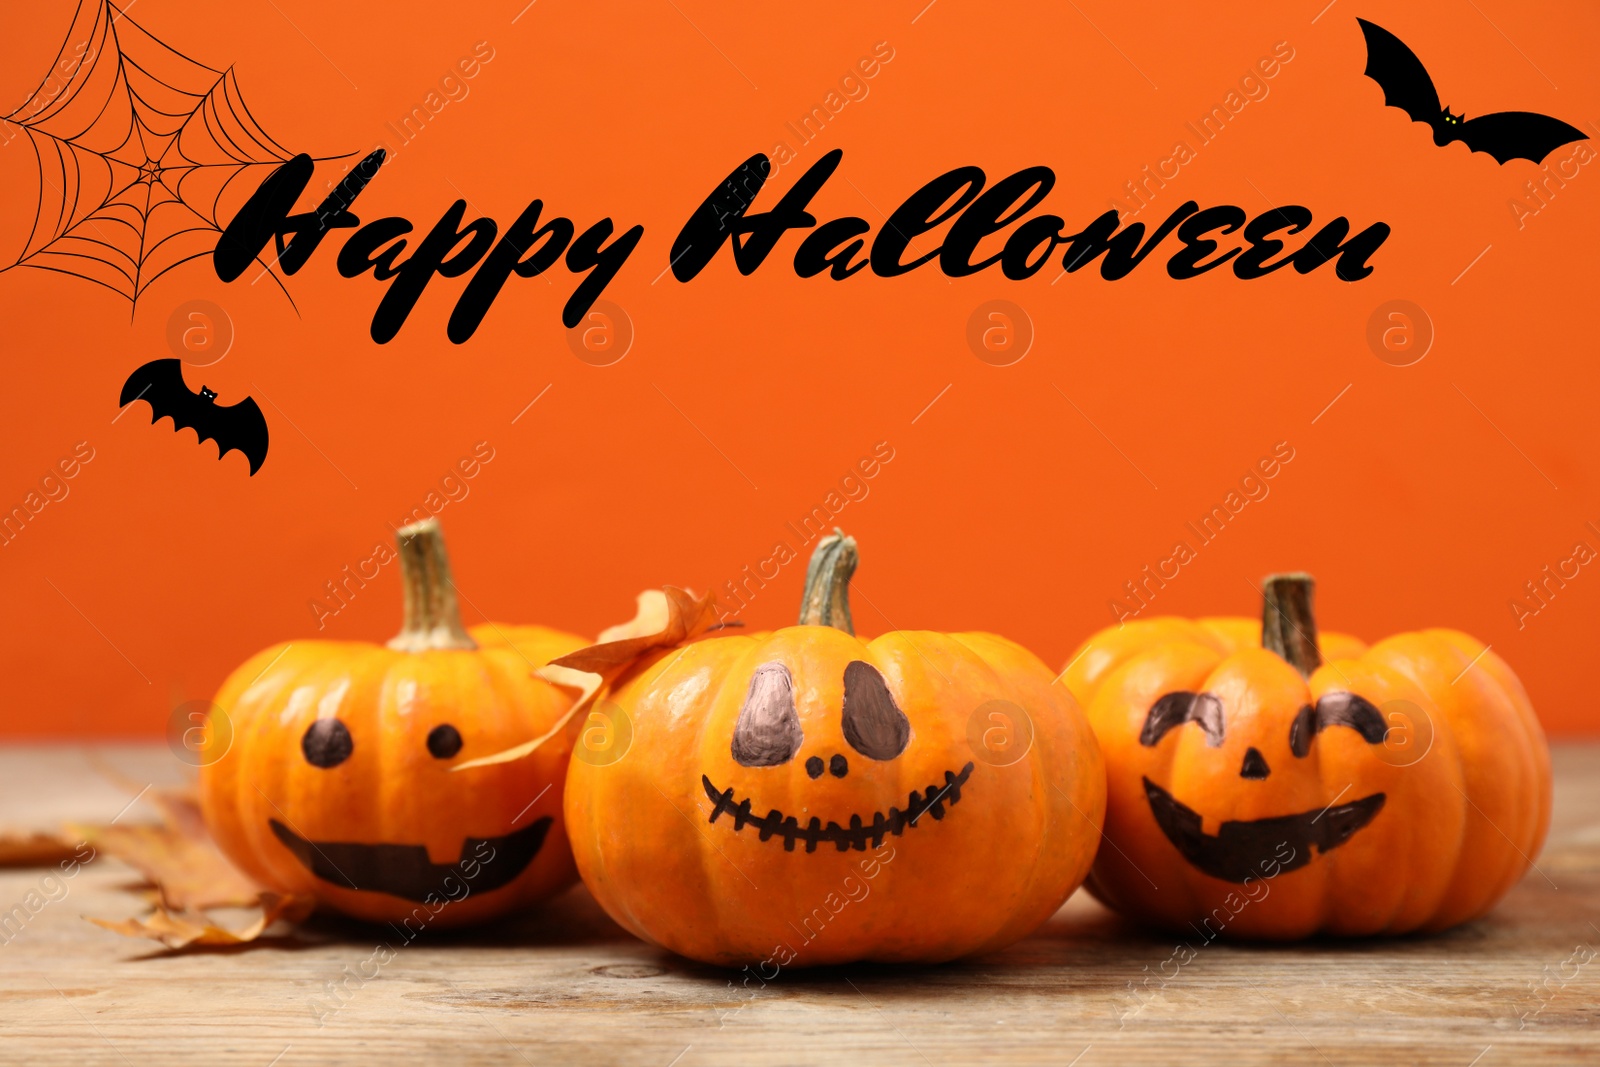 Image of Happy Halloween. Pumpkins with scary faces and fallen leaves on orange background